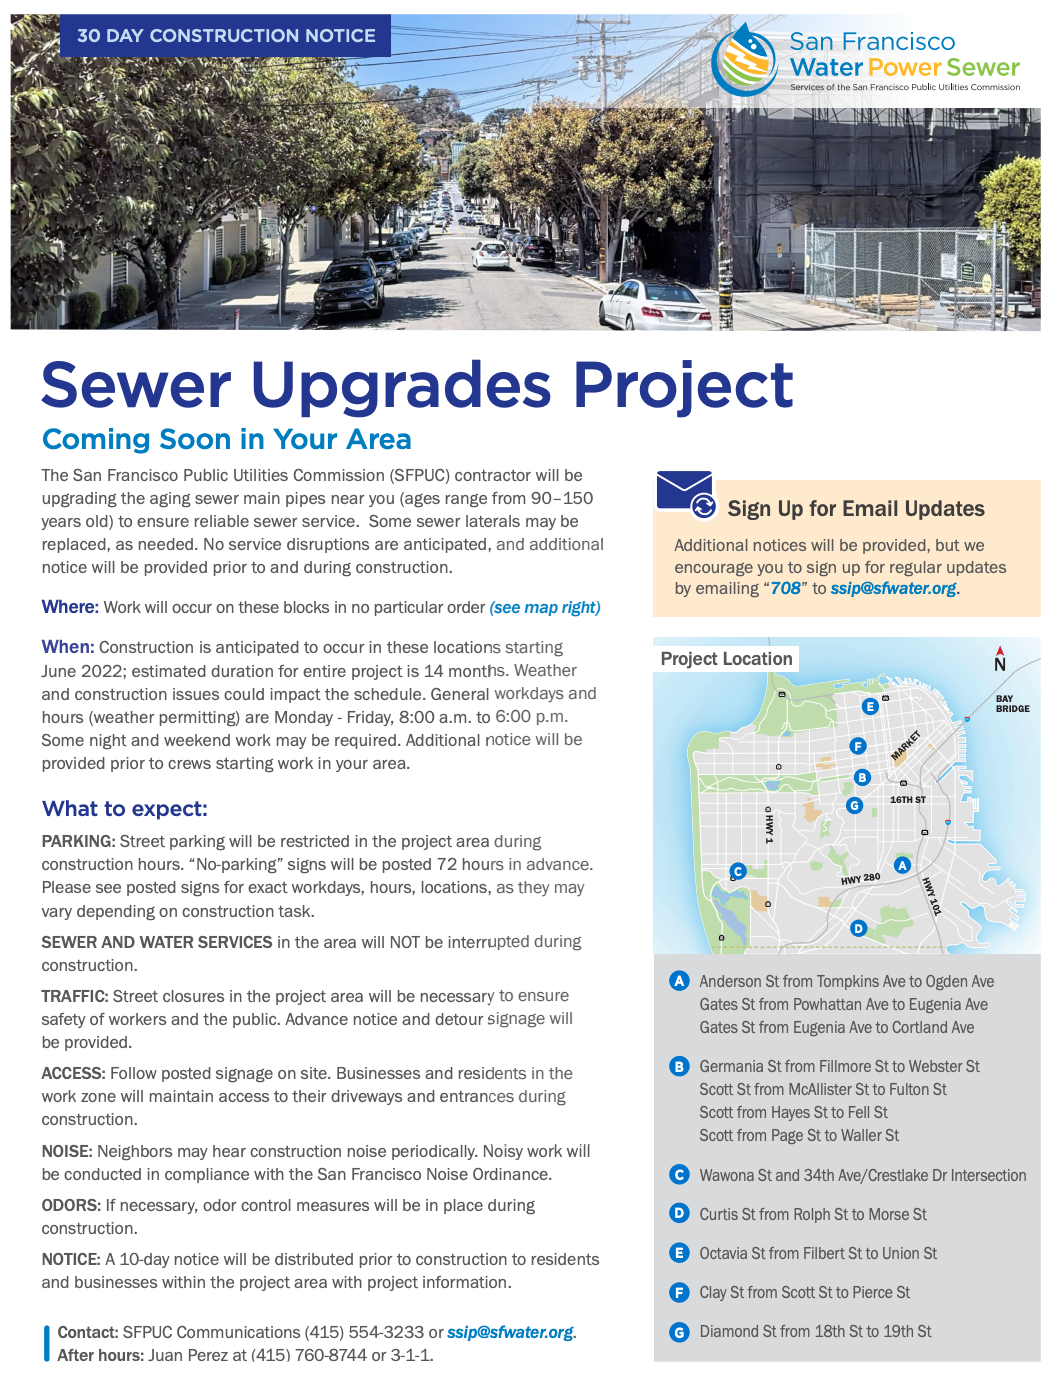 gates-street-sewer-upgrades-to-begin-what-to-expect-sf-water-power